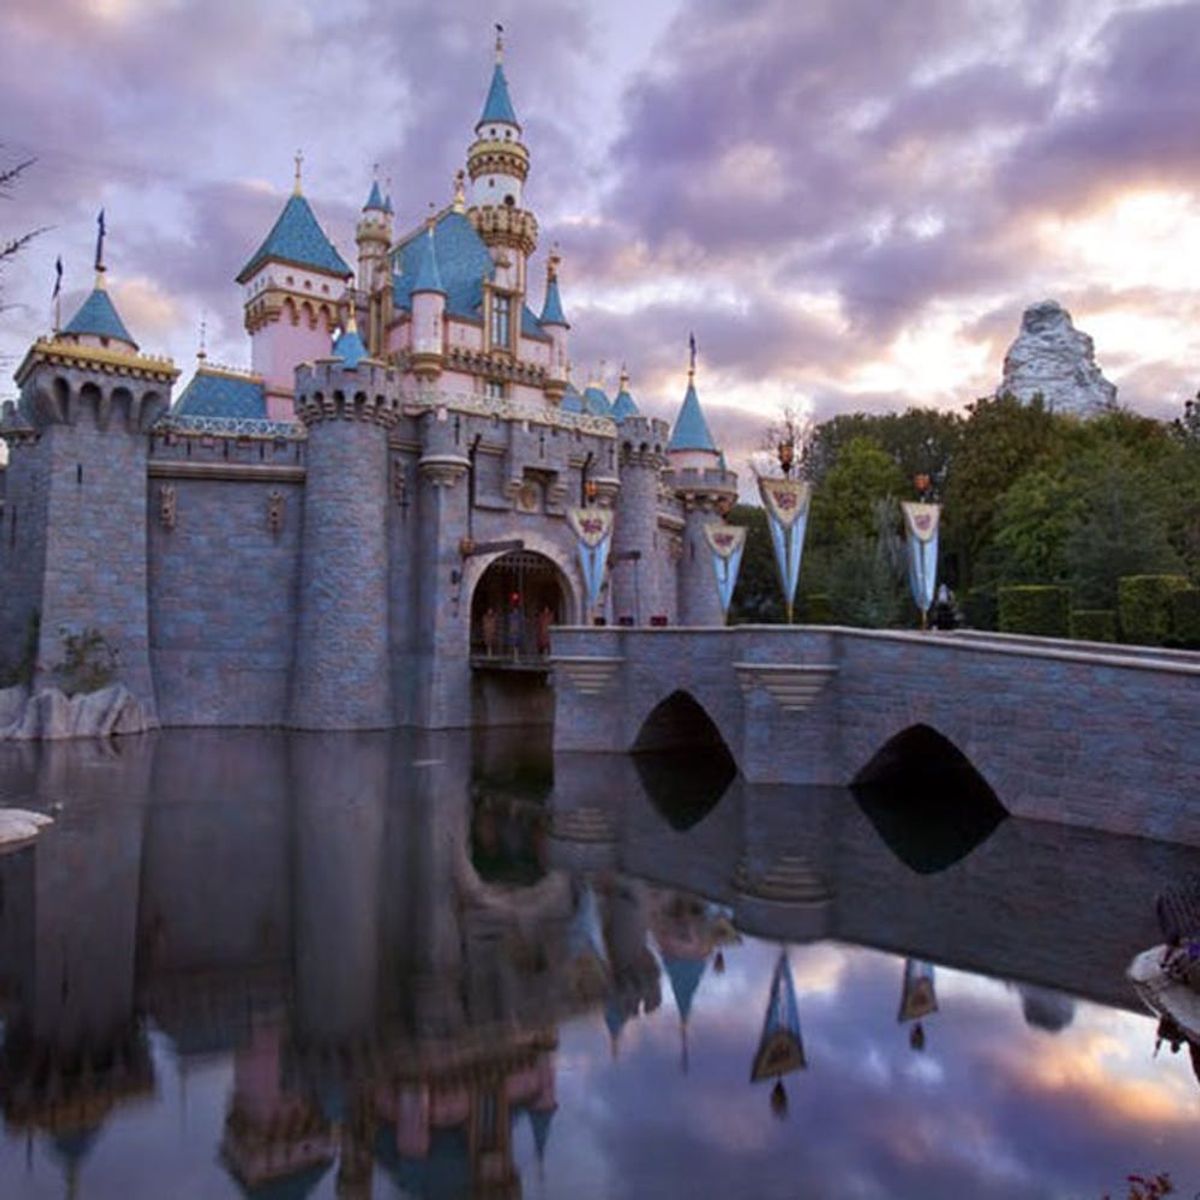 35 Crazy Little-Known Facts About Disneyland That Prove How Magical It Really Is